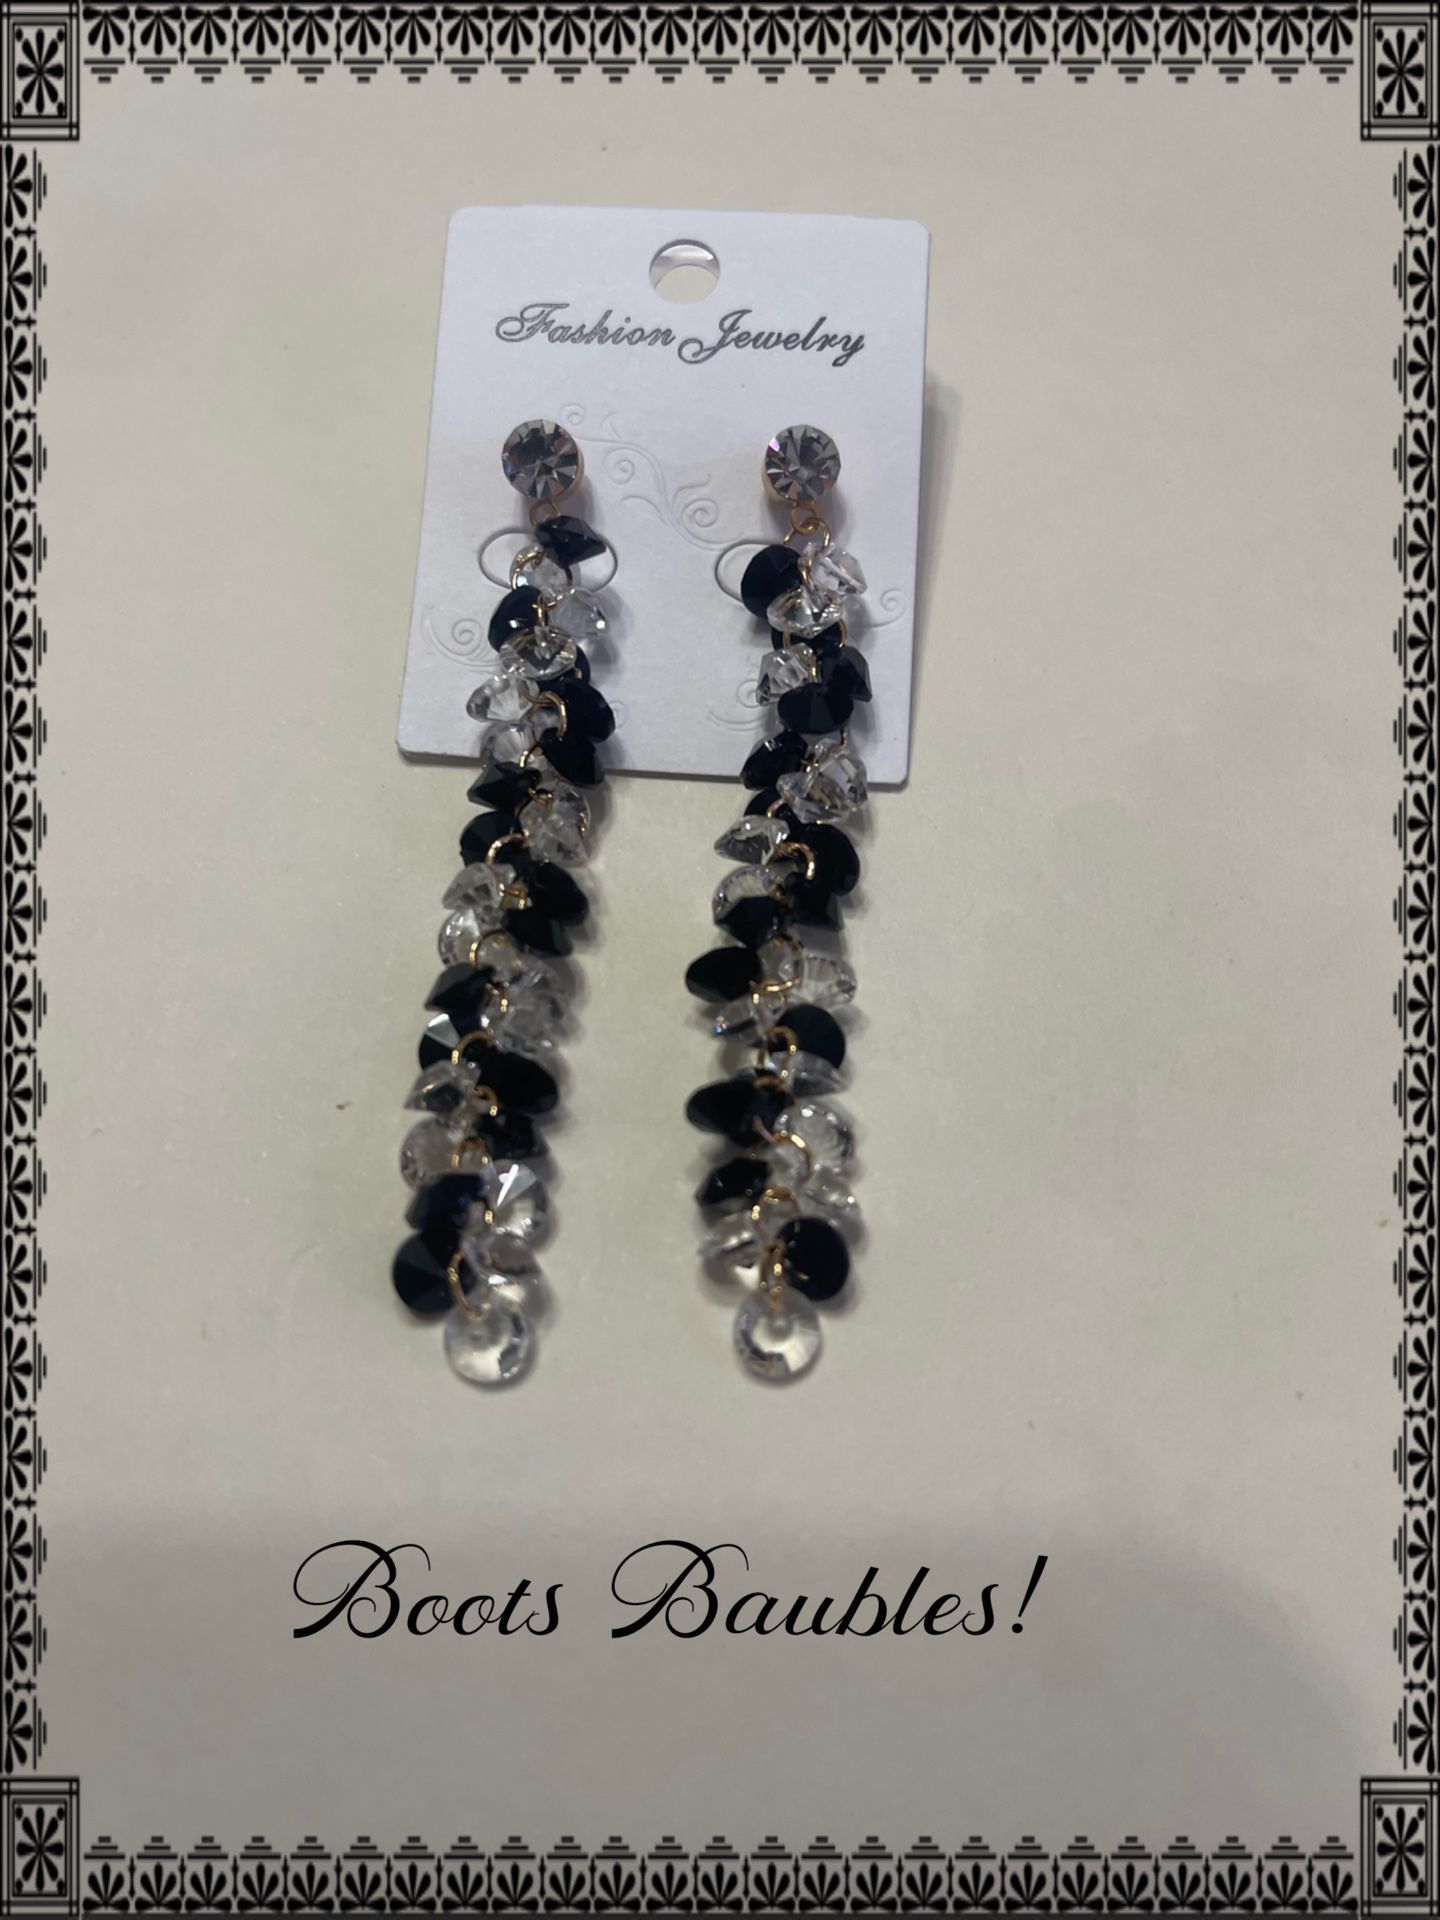 Black And Clear Crystal Drop Earrings